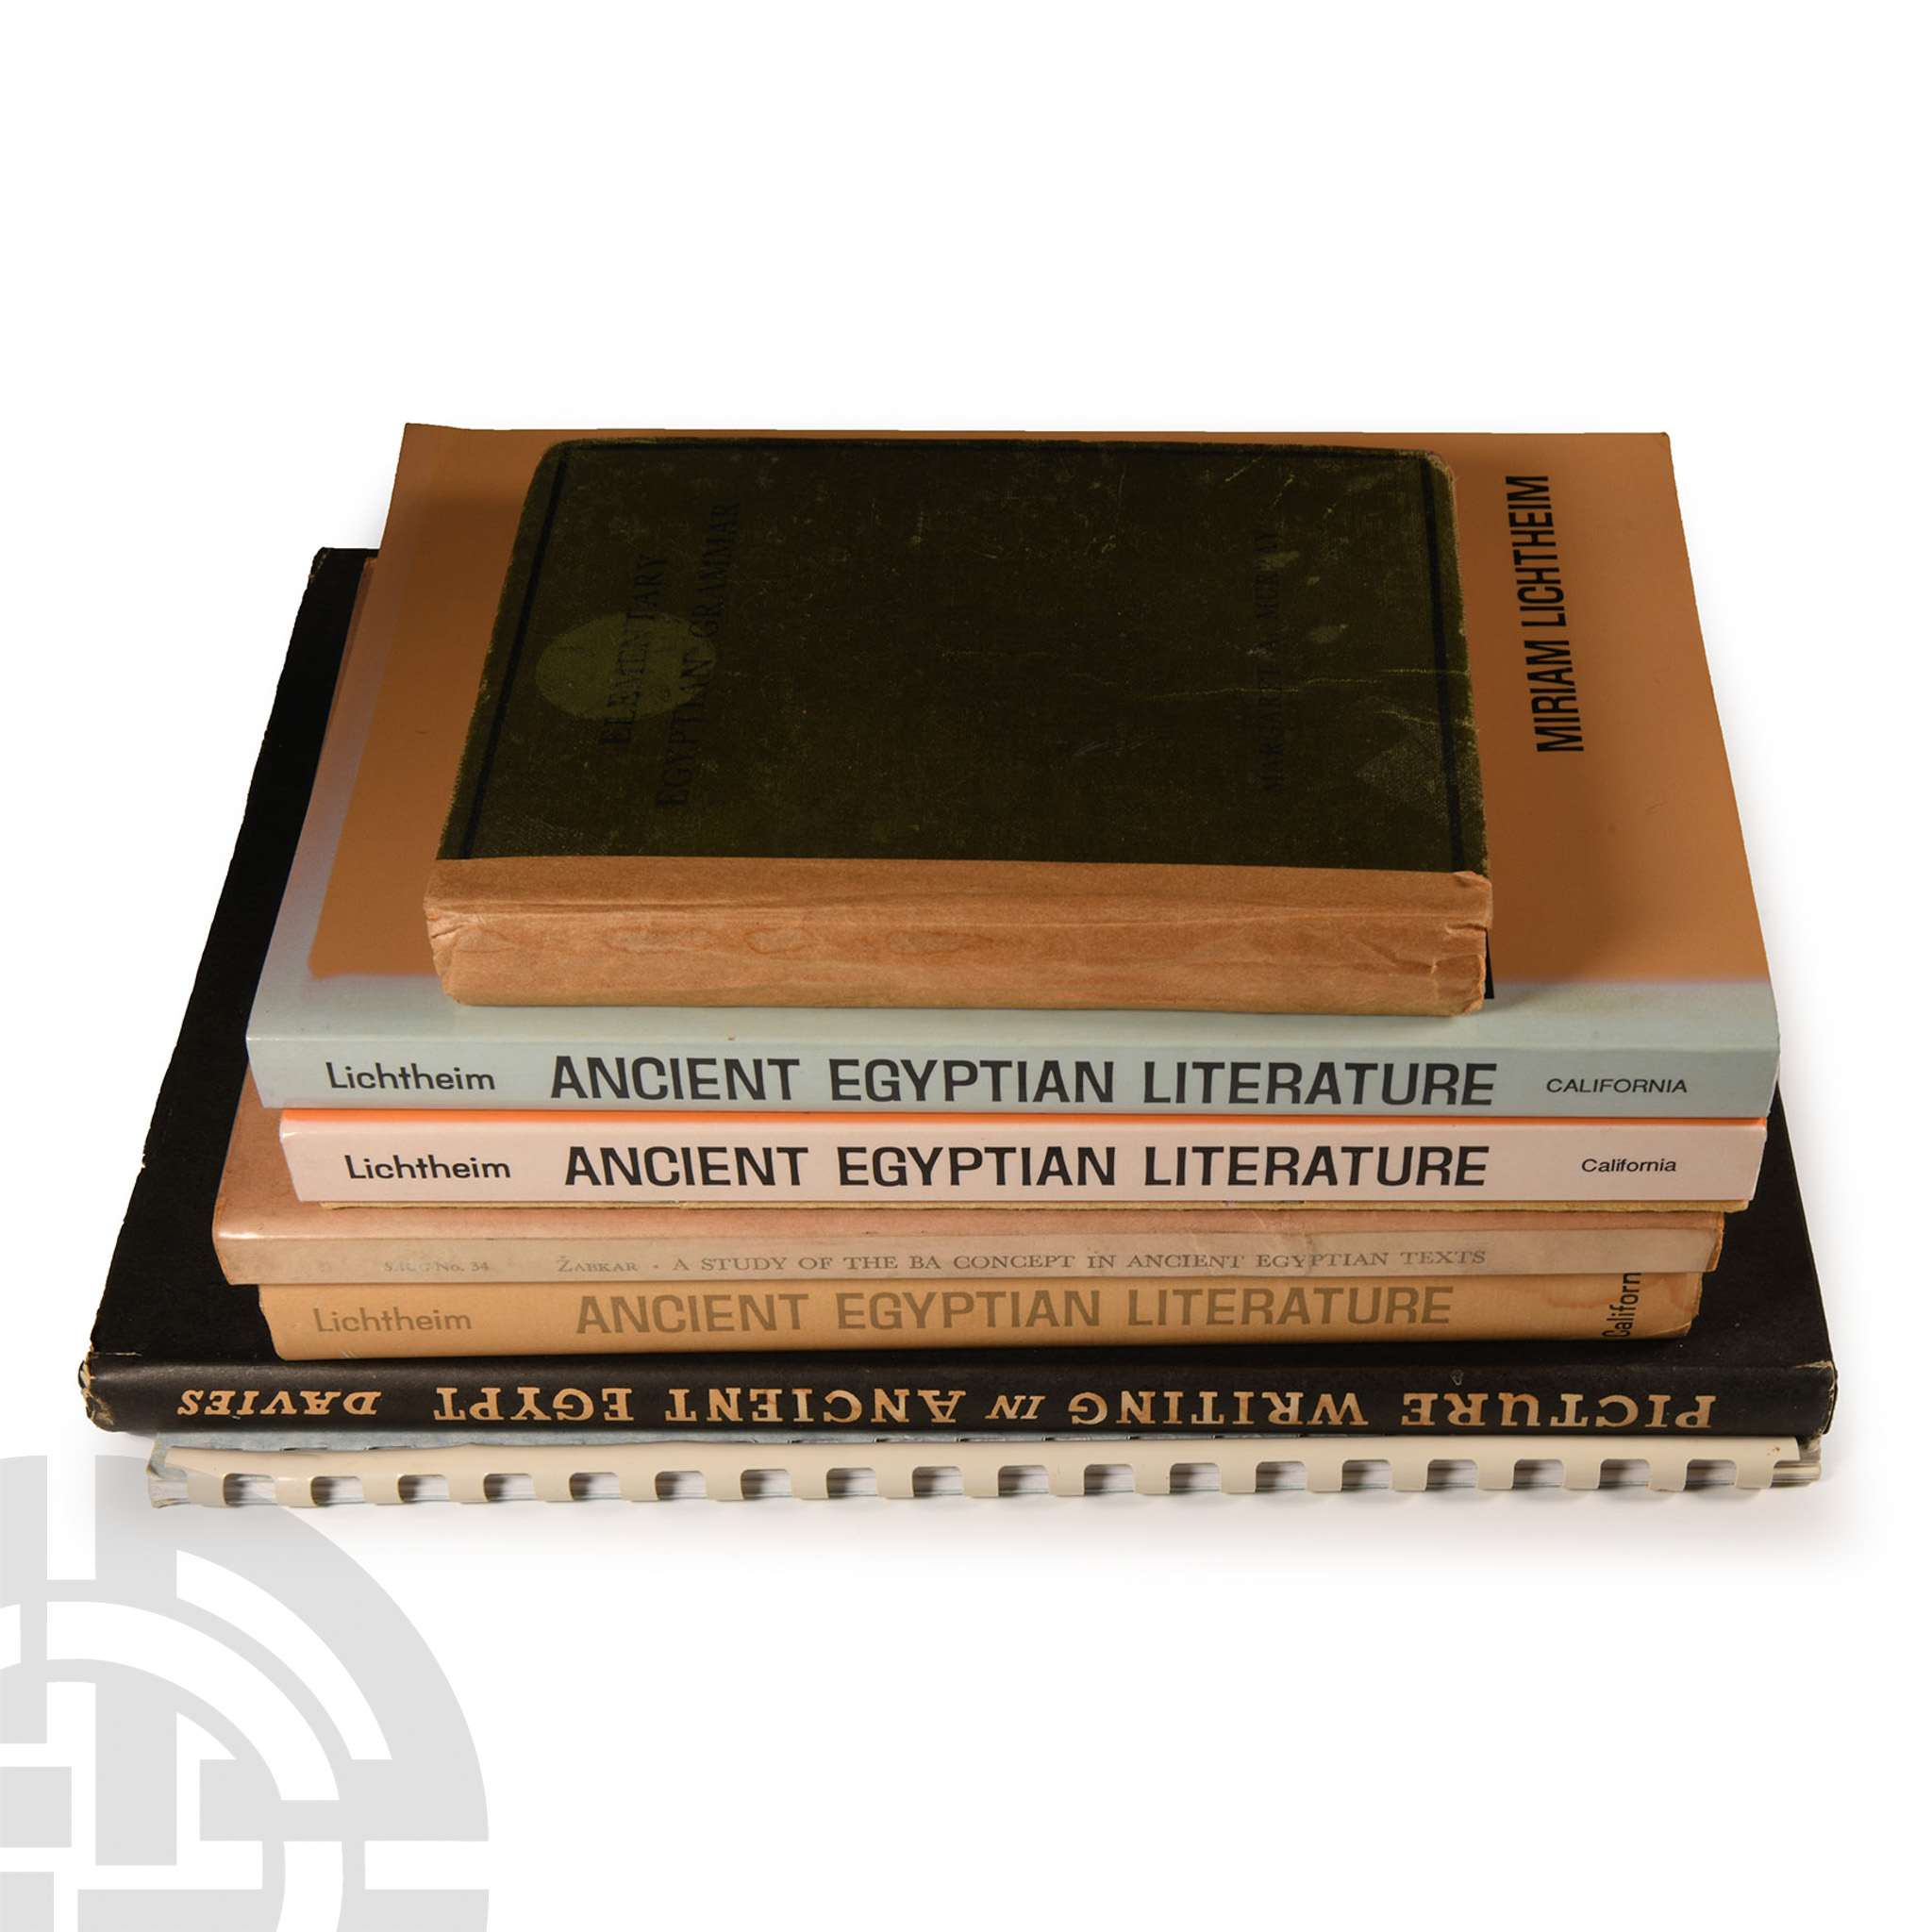 Archaeological Books - Ancient Egyptian Books on Writing and Literature